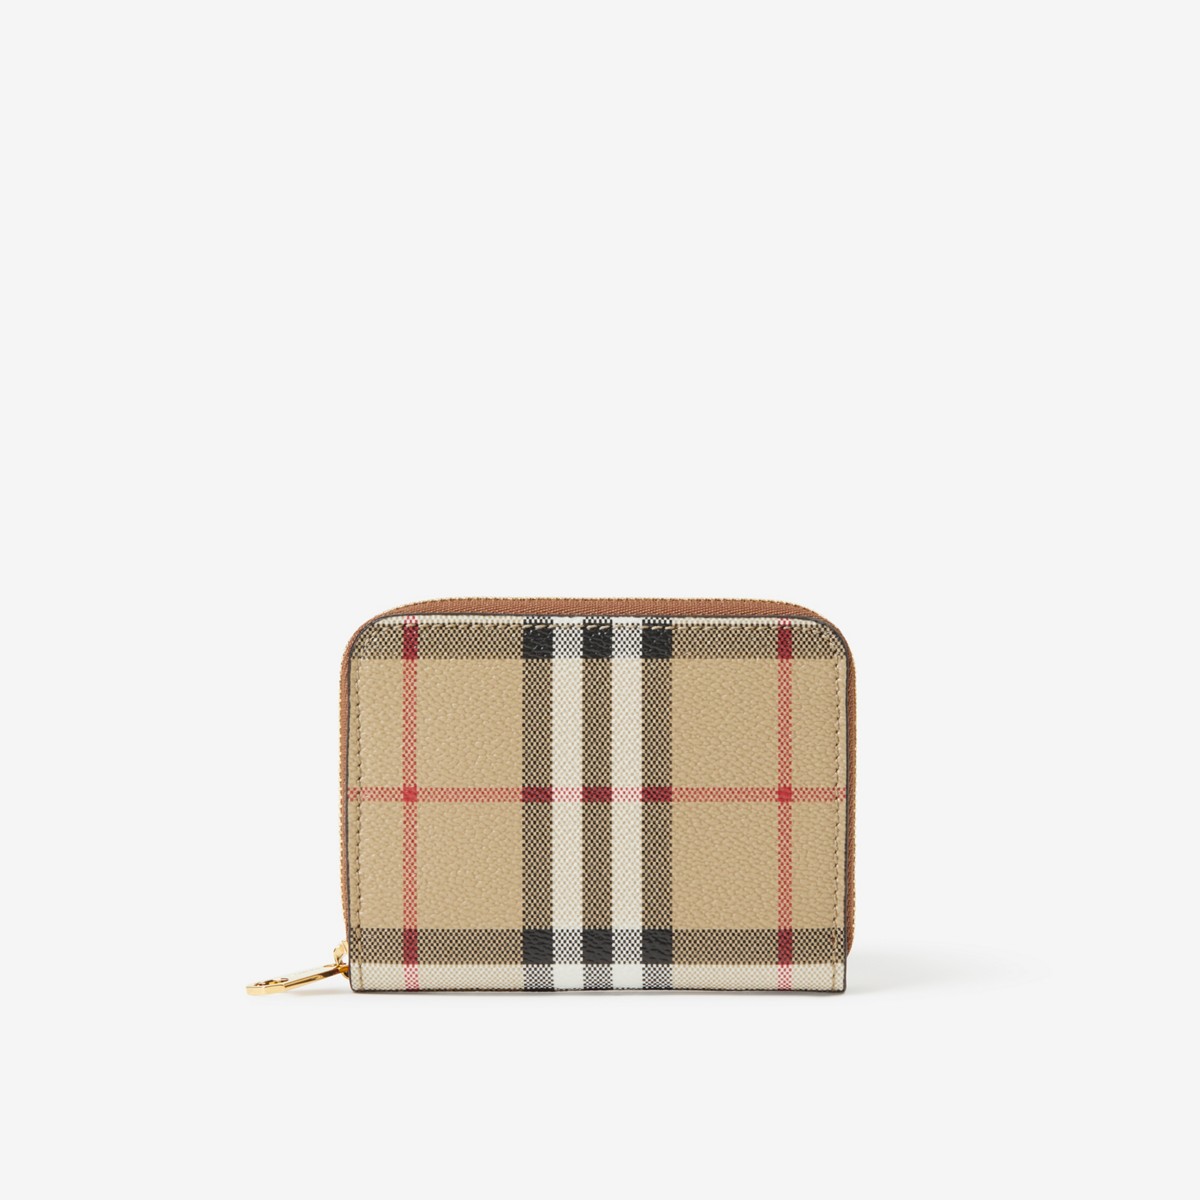 Burberry Check And Leather Zip Wallet In Archive Beige/briar Brown